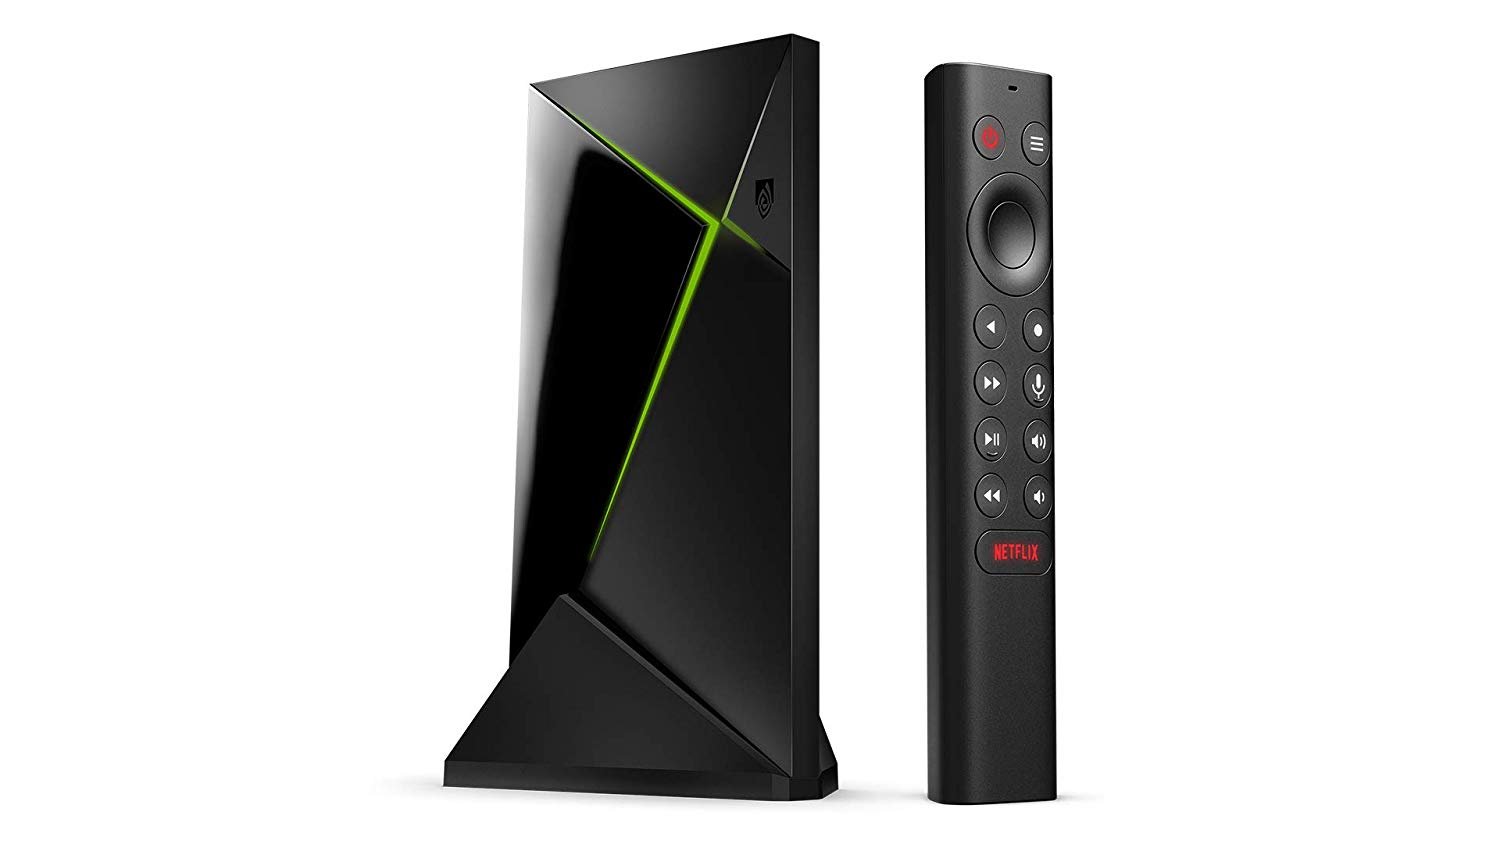 The New Android TV Nivida Shield Briefly Went Live on Amazon Earlier Today For $199.99